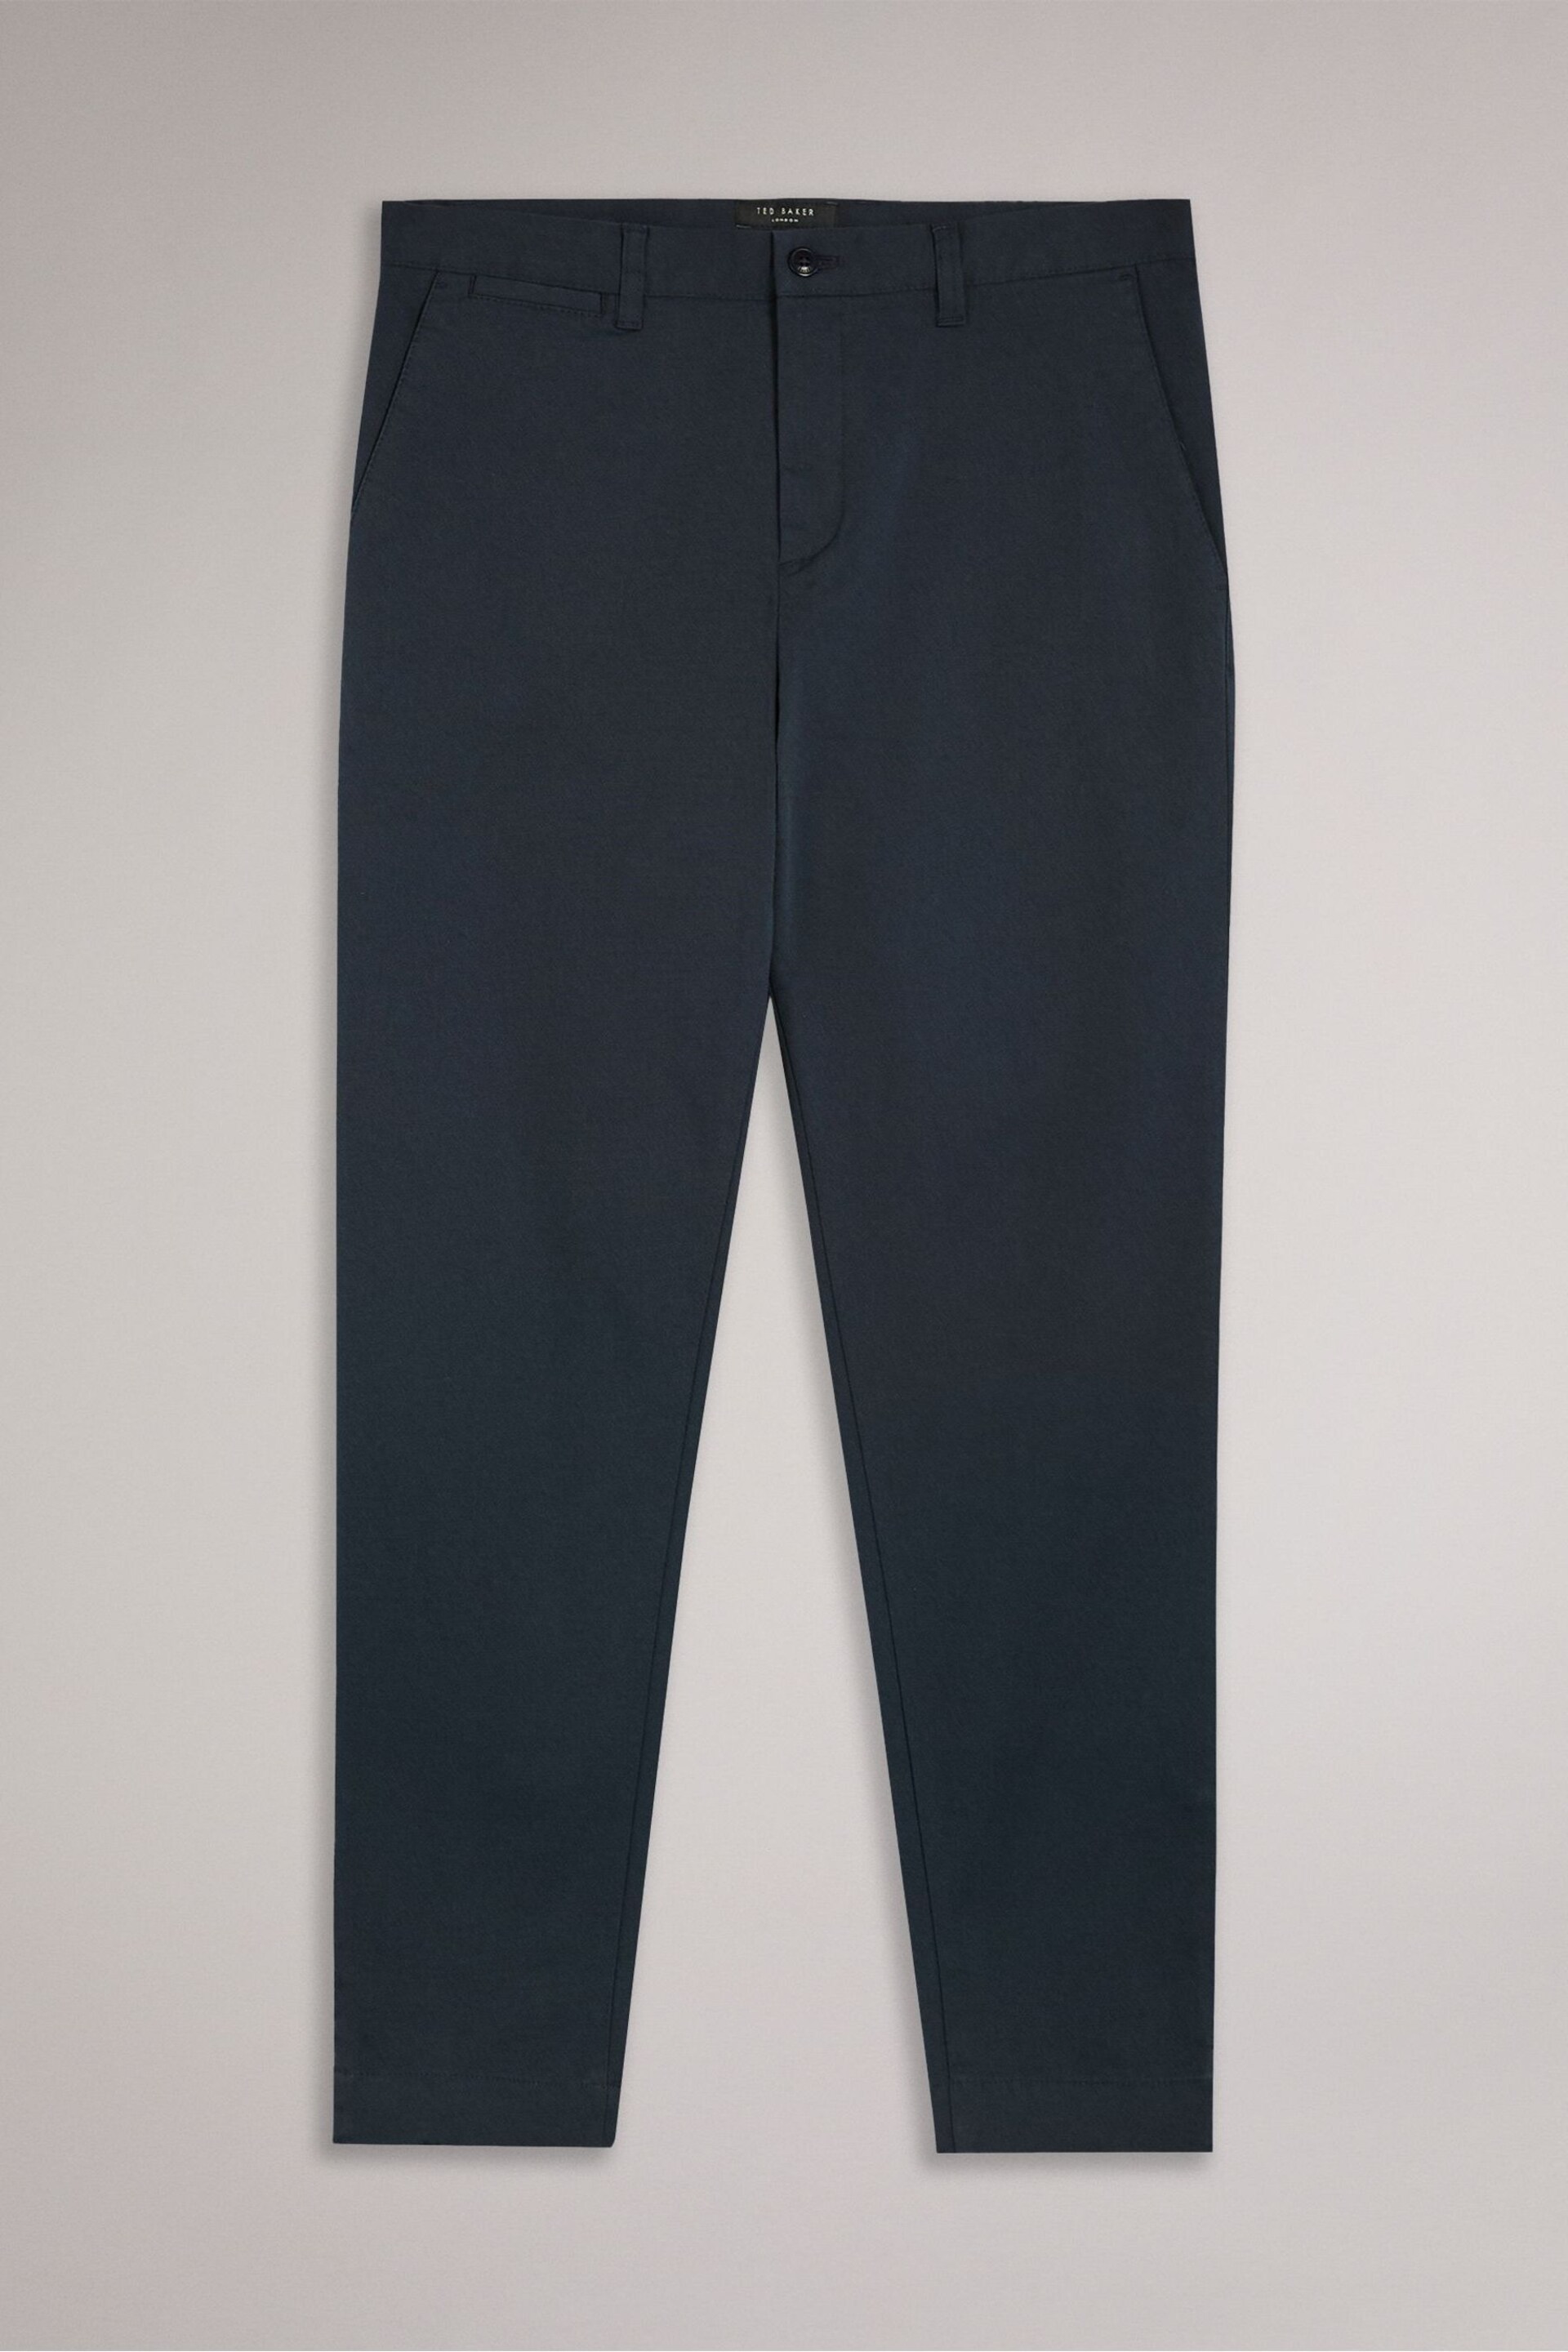 Ted Baker Blue Genbee Casual Relaxed Chinos - Image 4 of 6